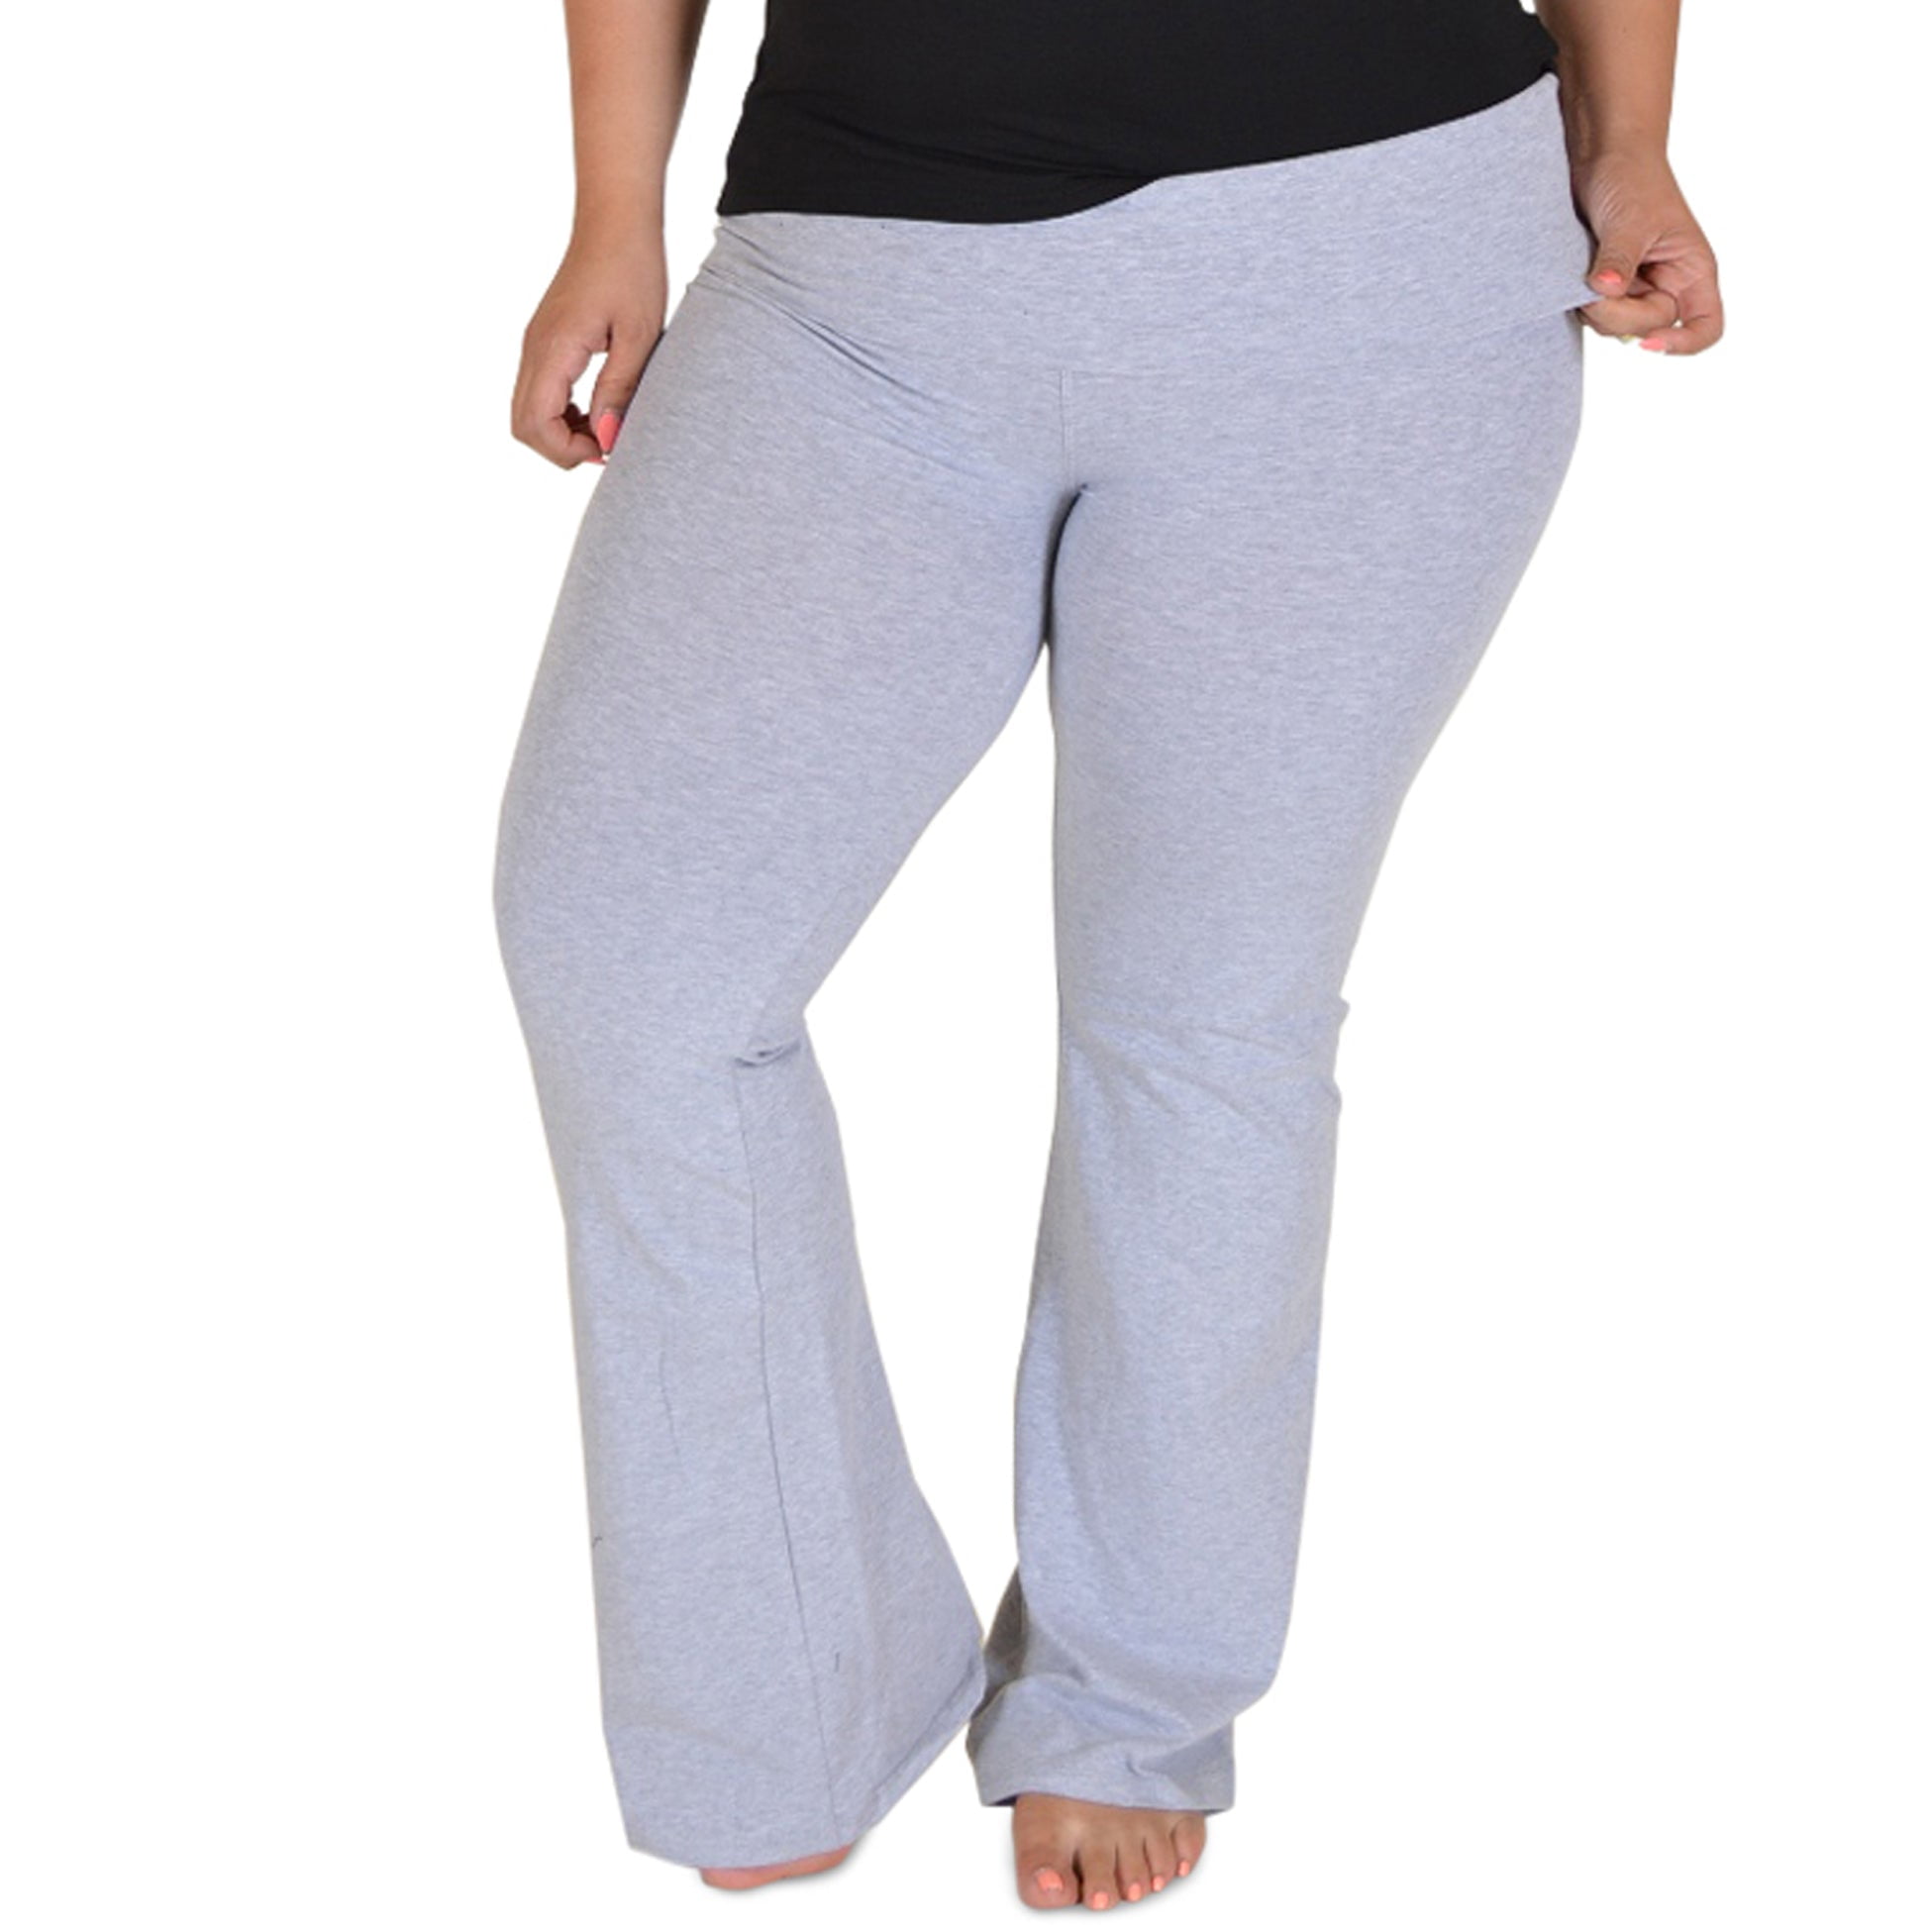 Stretch Is Comfort Women's Foldover Yoga Pant